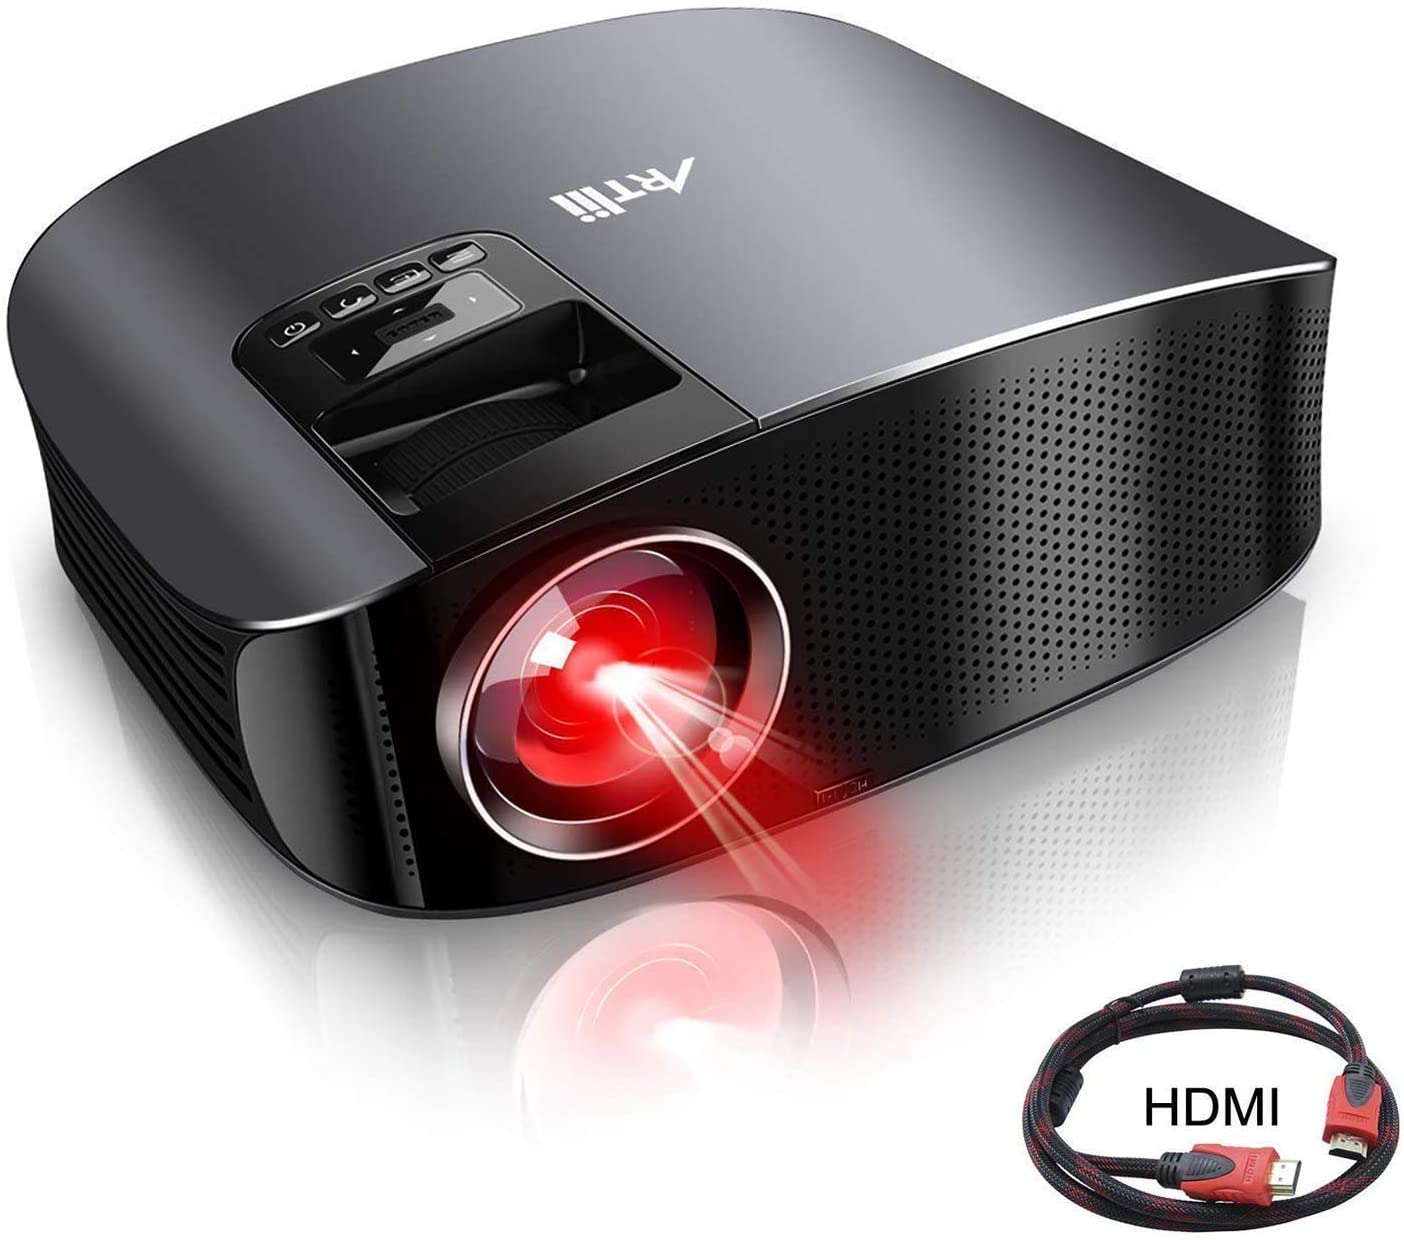 Movie Projector - Artlii 5500 LUX Full HD 1080P Support Projector,